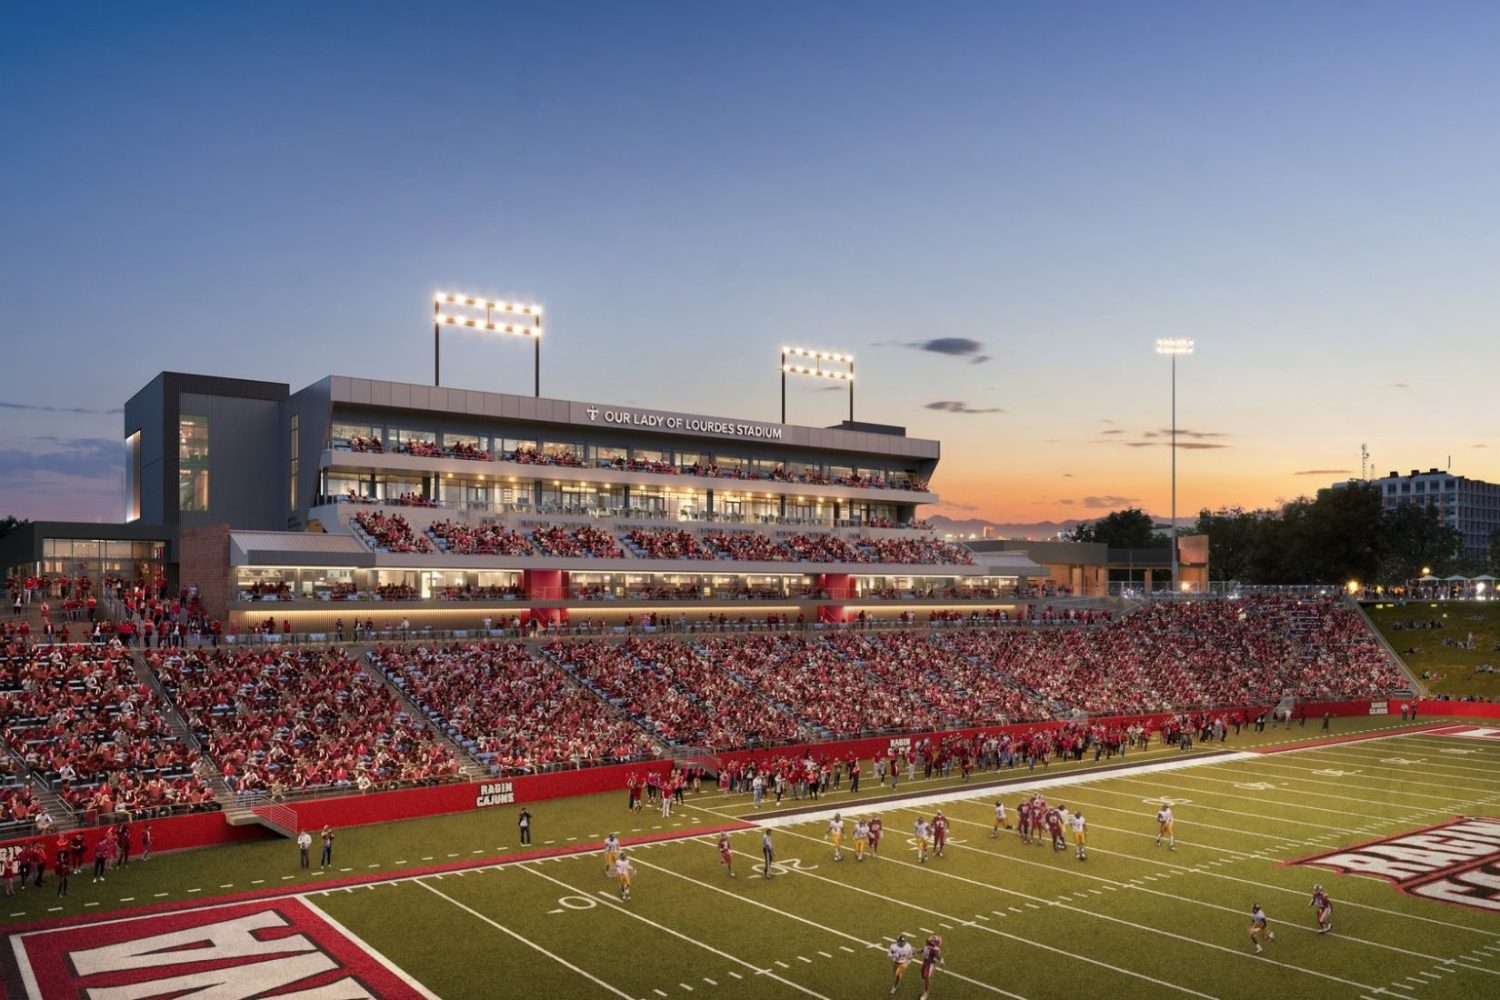 A rendering of the proposed renovations to the Louisiana Ragin' Cajuns football stadium.